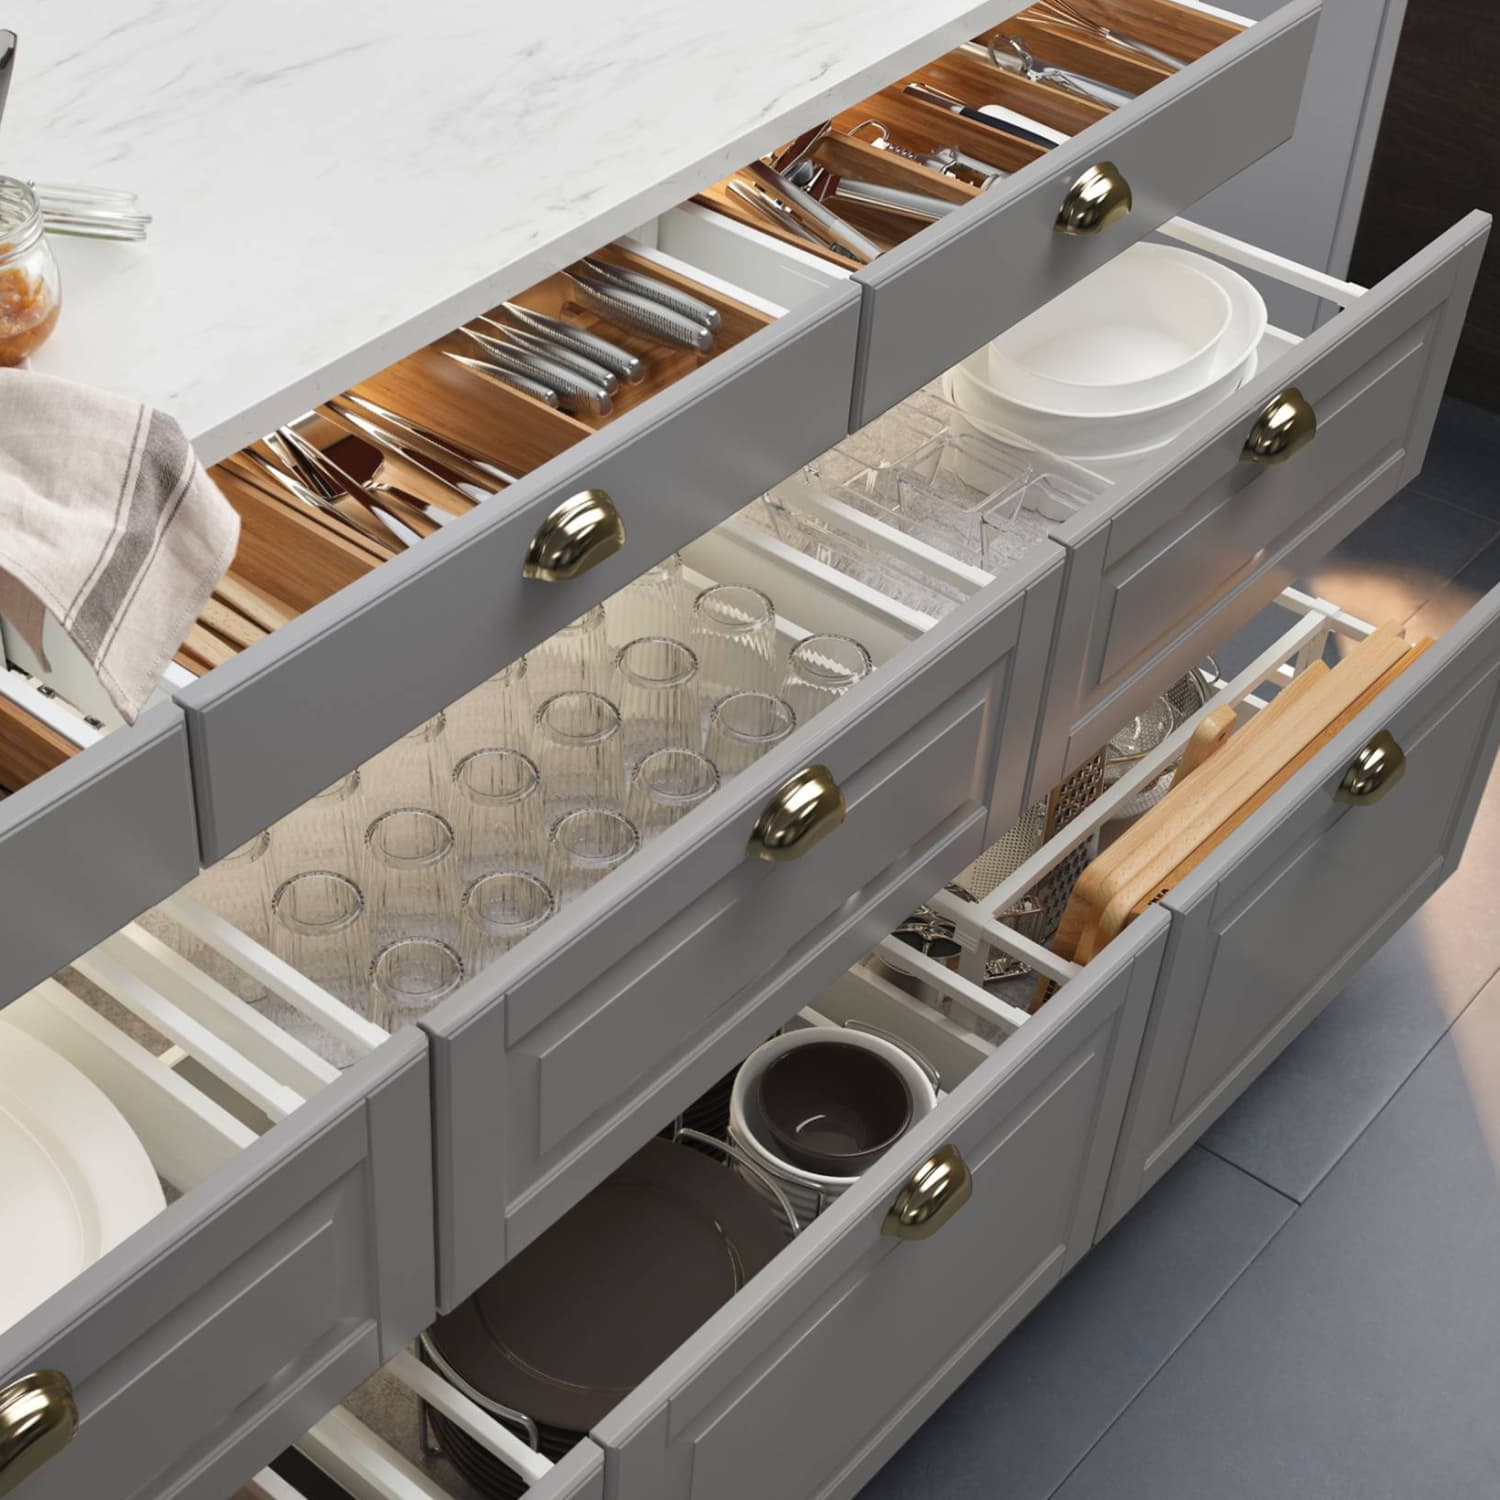 Is it better to have doors or drawers in a kitchen? The experts